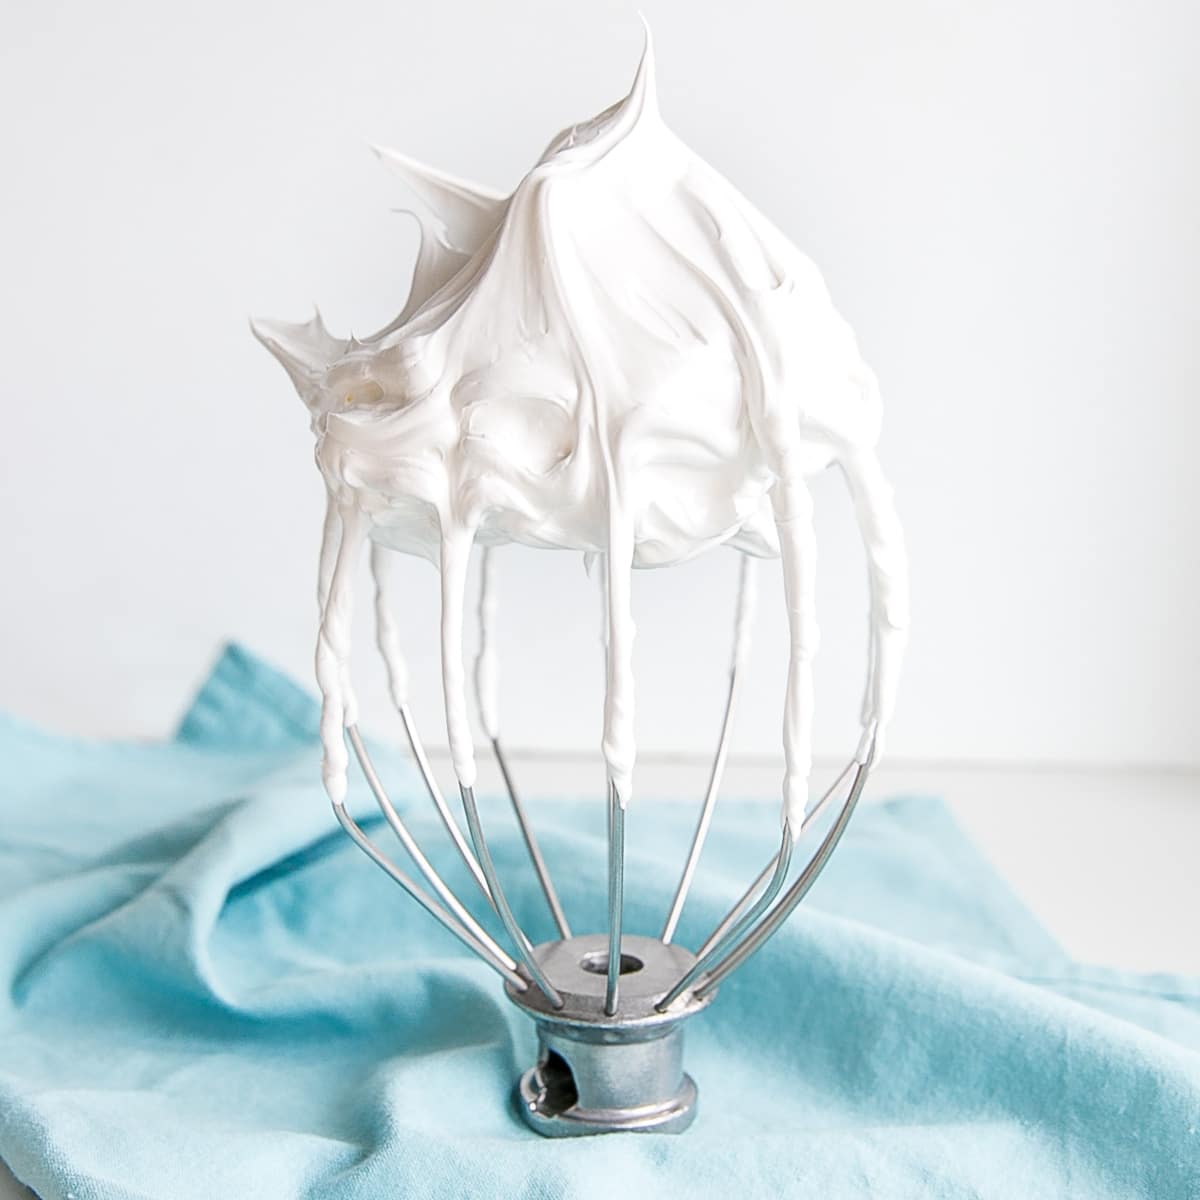 7 minute frosting shown on a stand mixer whisk.